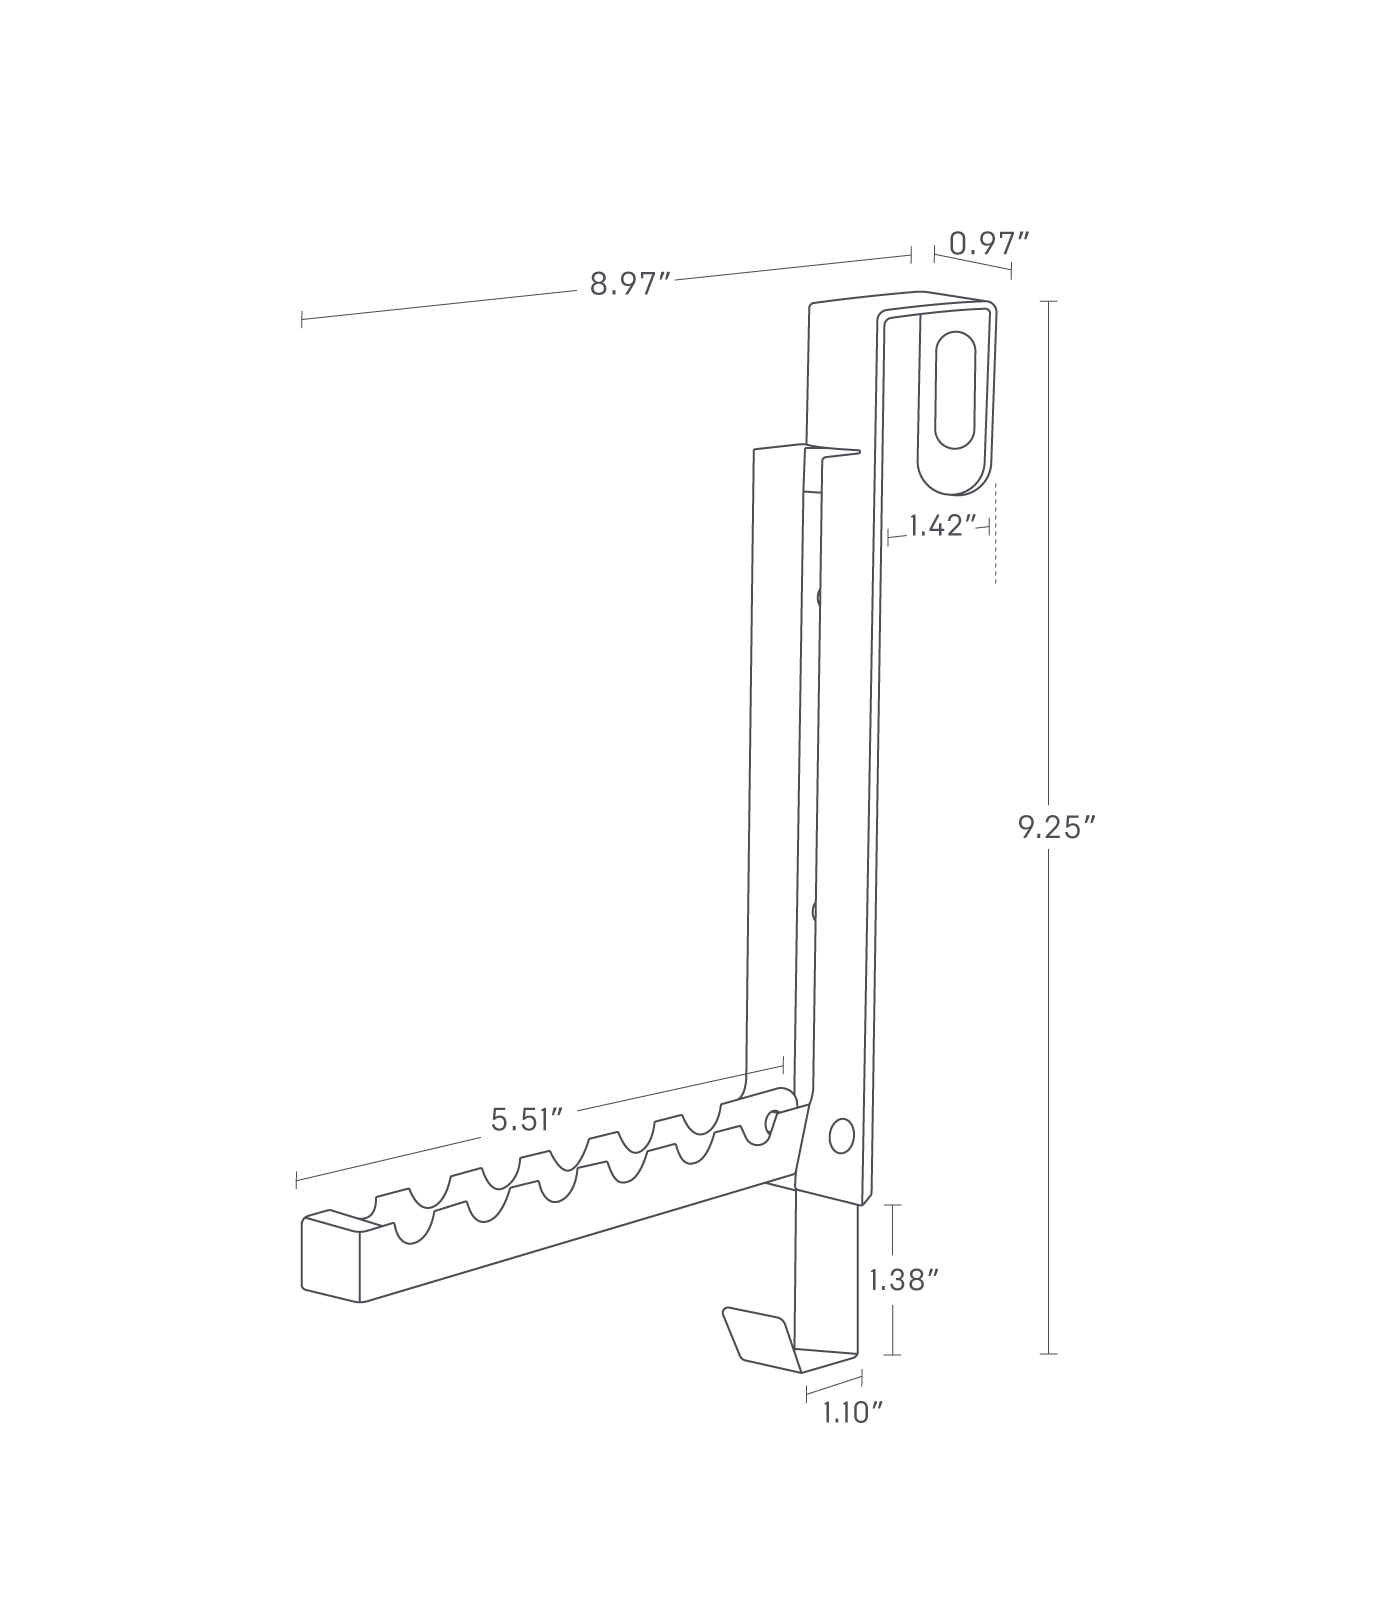 Dimension image for Over-the-Door Hook with total height of 9.25